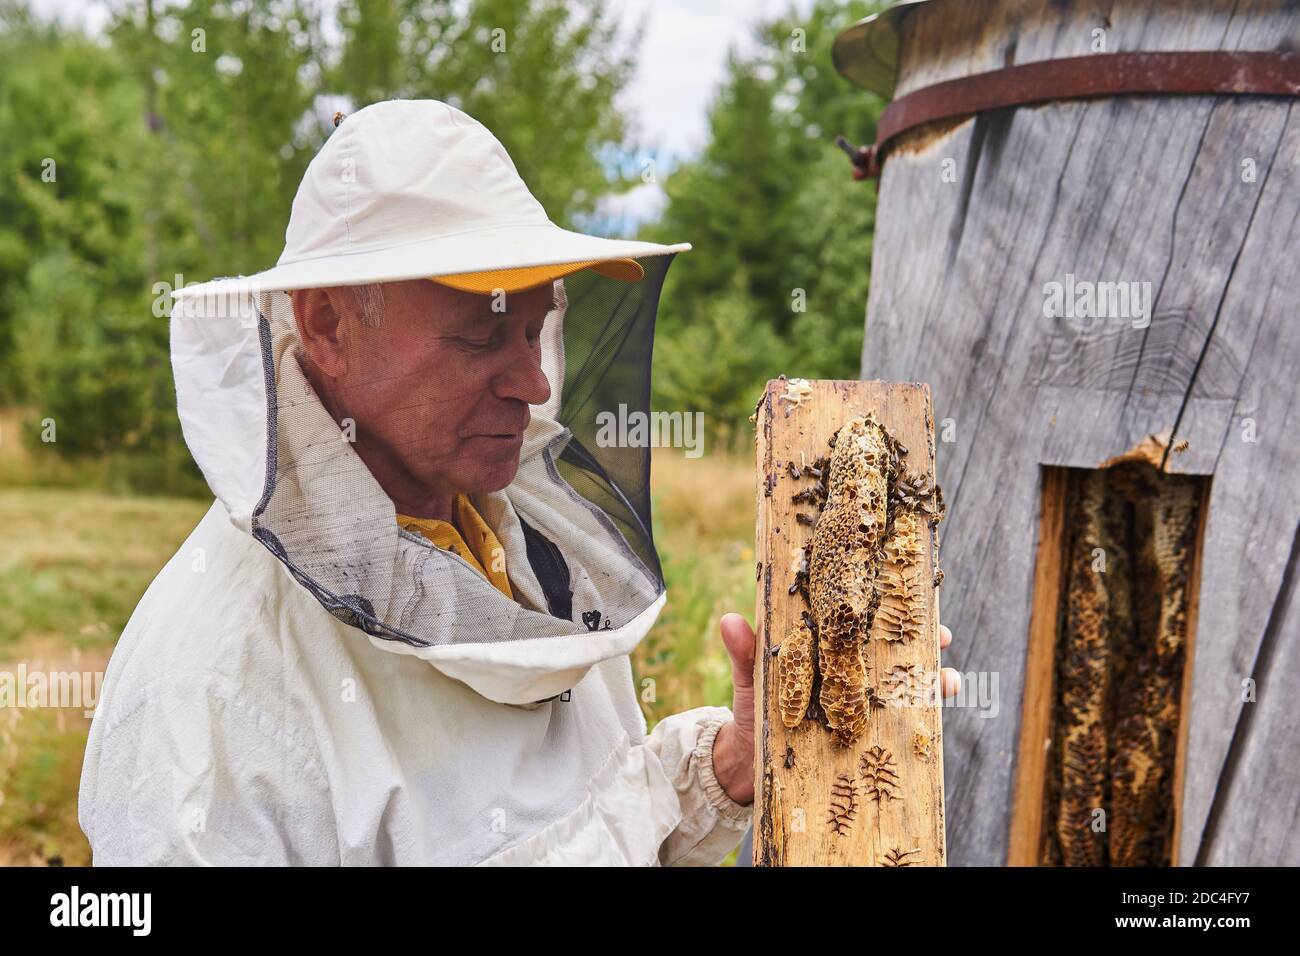 Perm, Russia - August 13, 2020: beekeeper checks a bee colony in a traditional hive inside a log Stock Photo